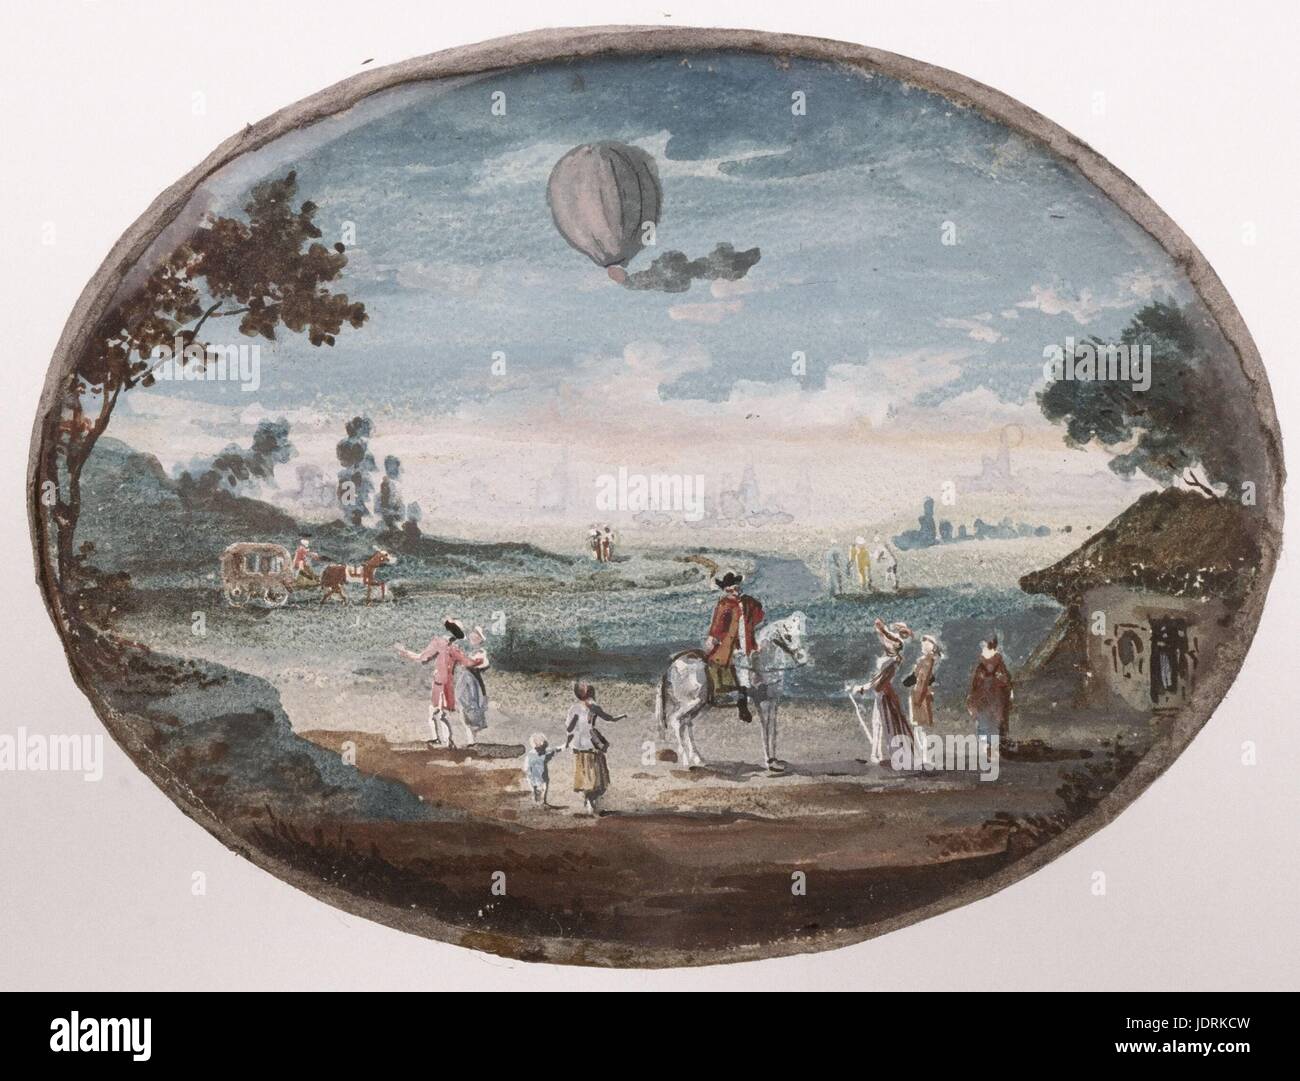 The Montgolfier brothers' first public aerostatic experiment in Annonay on 4th June 1783  Painting on vellum (7.2 x 9.2 cm)  Muller-Quênot Collection Since December 1782, Joseph-Michel et Etienne Montgolfier carried out aeronautical experiments sometimes in the afternoons and during the night within the boundaries of the family paper mill. With the pressure from their associates and the insistent rumour about the 'curious' engine, Etienne et Joseph-Michel cancelled its initial launch date on 4th June 1783, to hold a public experiment in front of the Membres des Etats Particuliers of Vivarais w Stock Photo